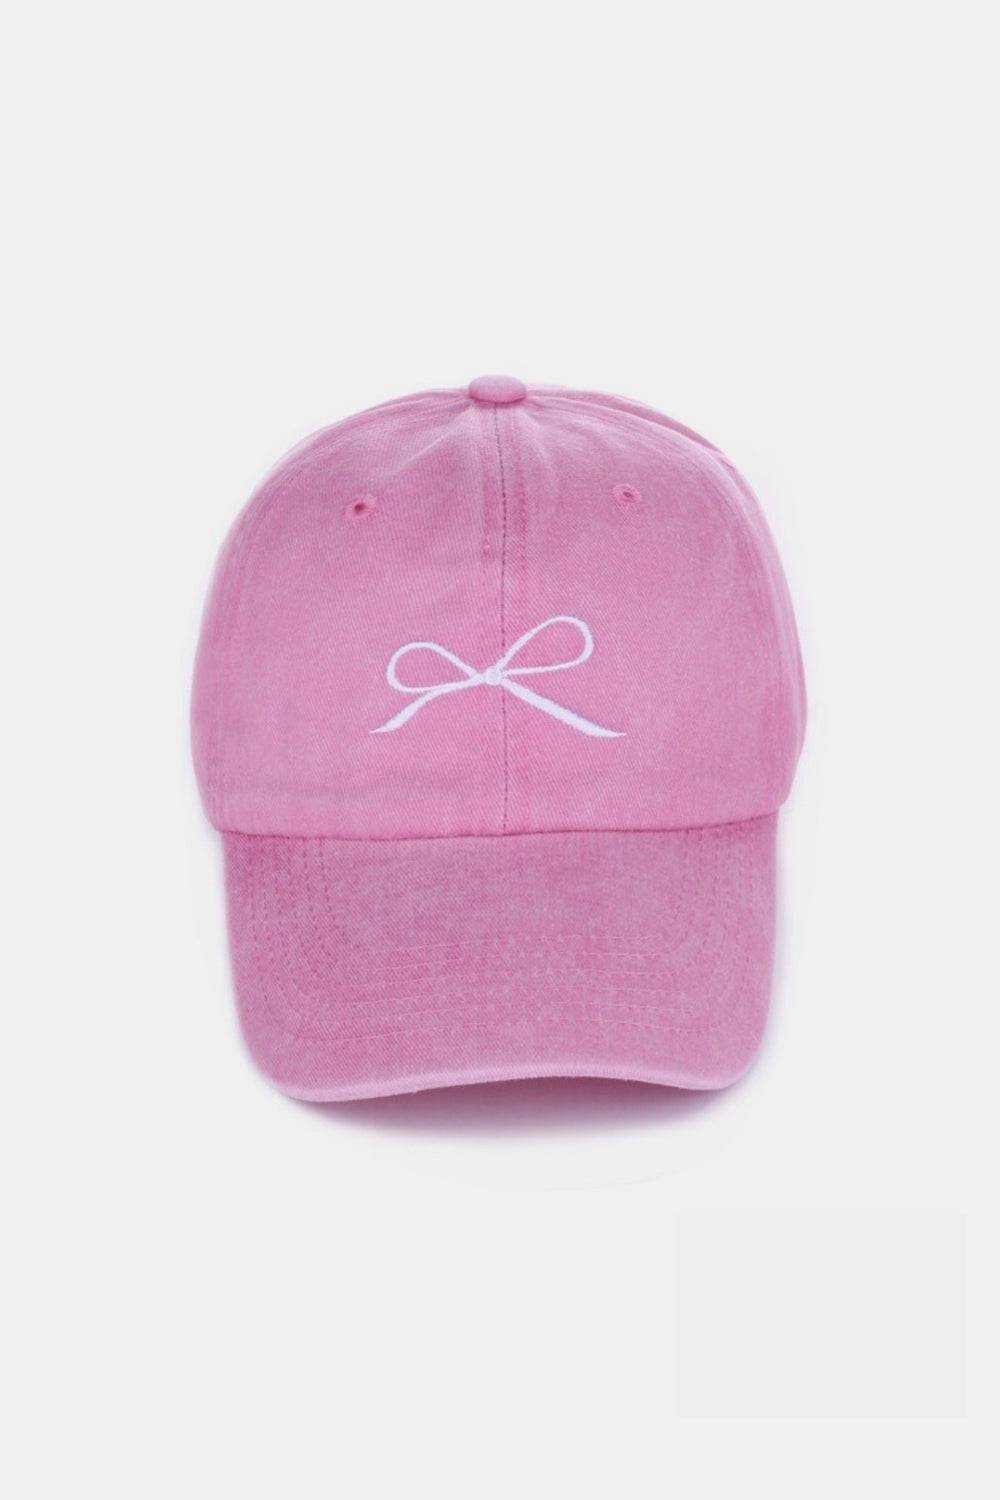 a pink hat with a white bow on it